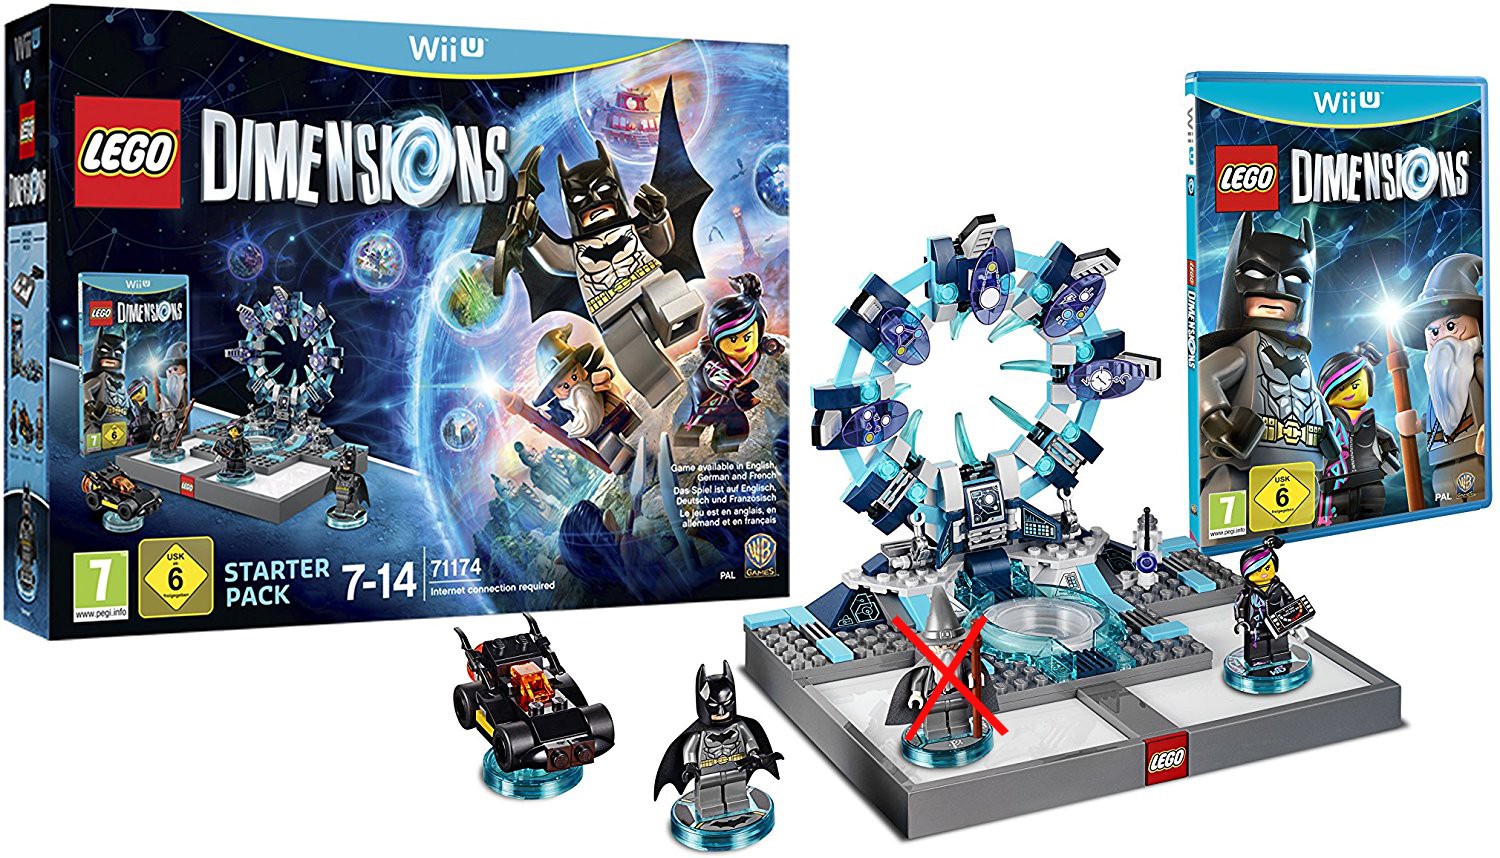 Wii U LEGO Dimensions Starter Pack without Gandalf Minifigure